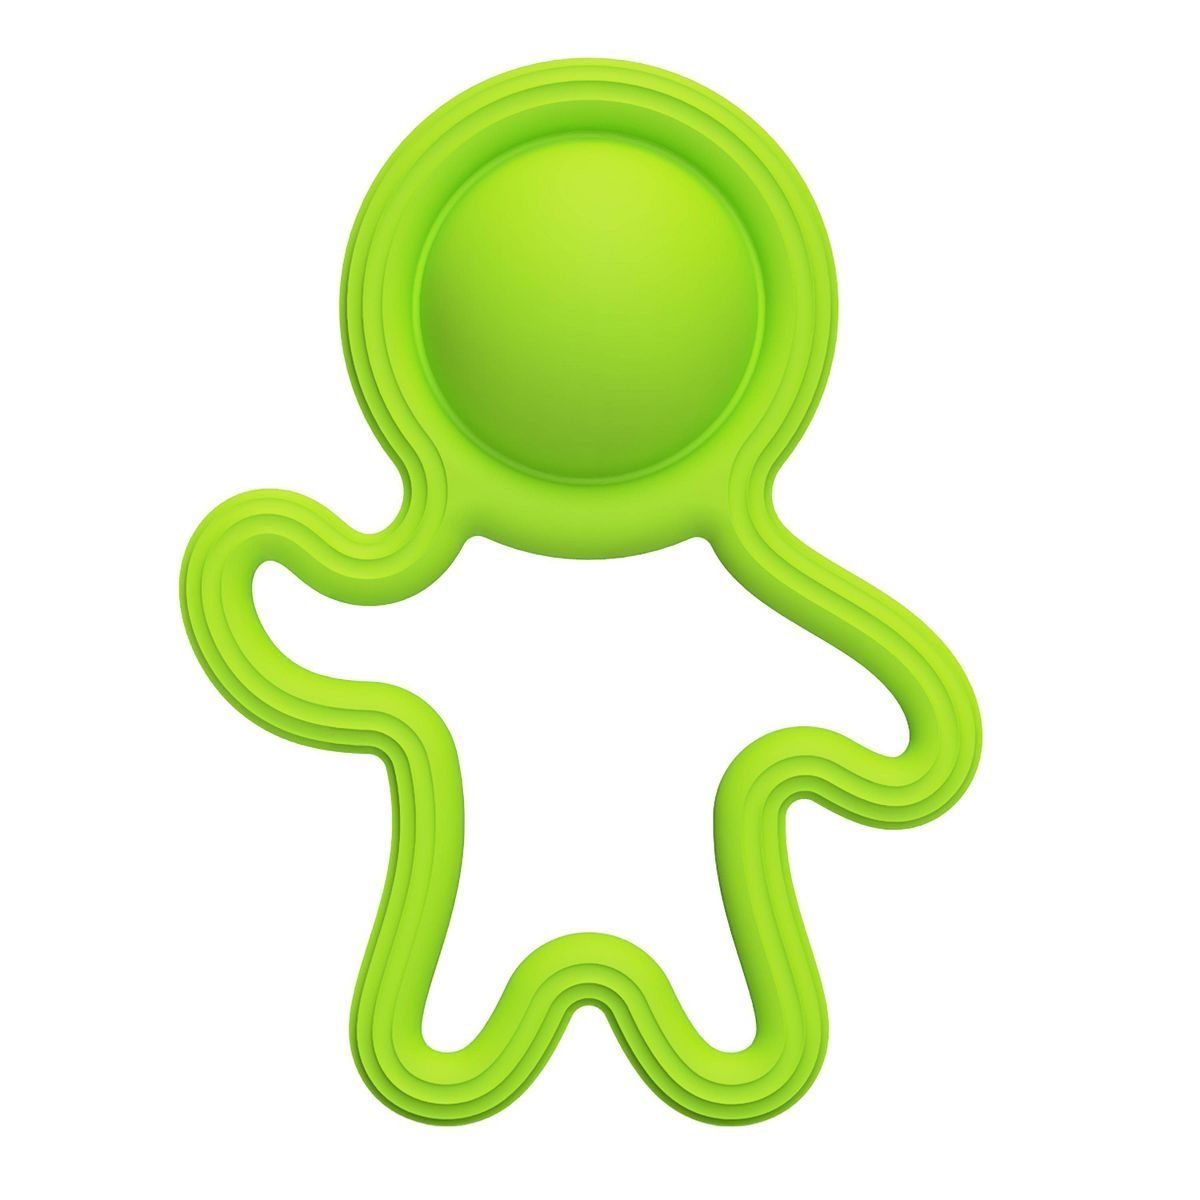 Fat Brain Toys Lil Dimpl Toy - Green | Target